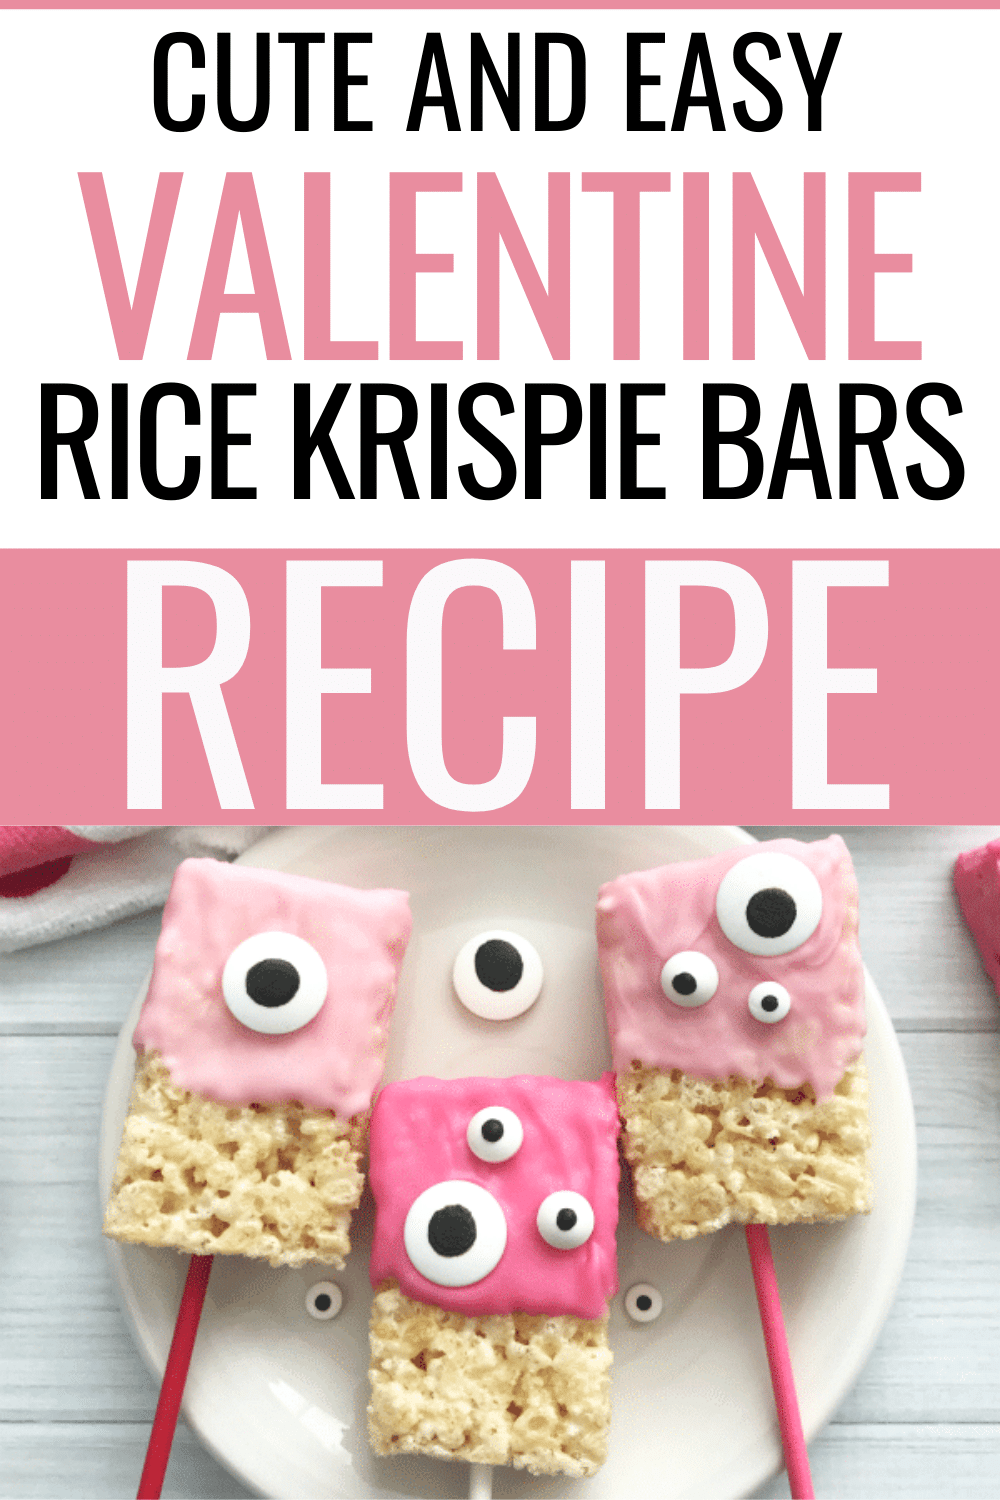 Valentine's Day Rice Krispie Treats are easy to make with candy melts and candy eyes. These monster themed Valentine's Day treats will be a hit. #valentinesday #ricekrispie #monsters #ricekrispietreats via @wondermomwannab